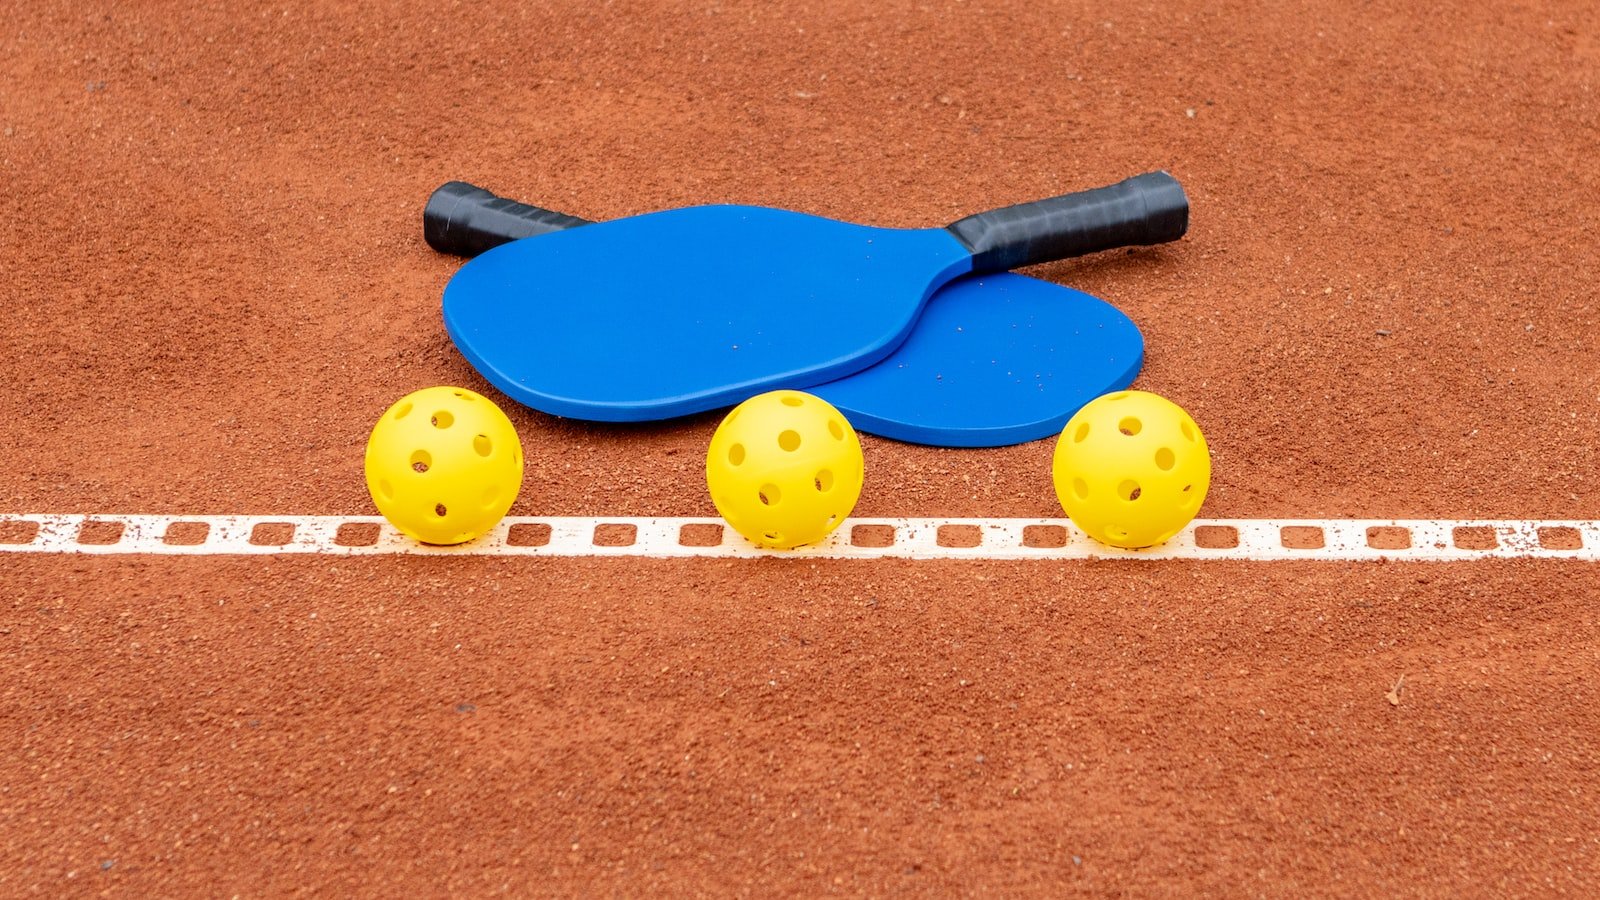 The Friendships Forged in Pickleball: Stories from the Court